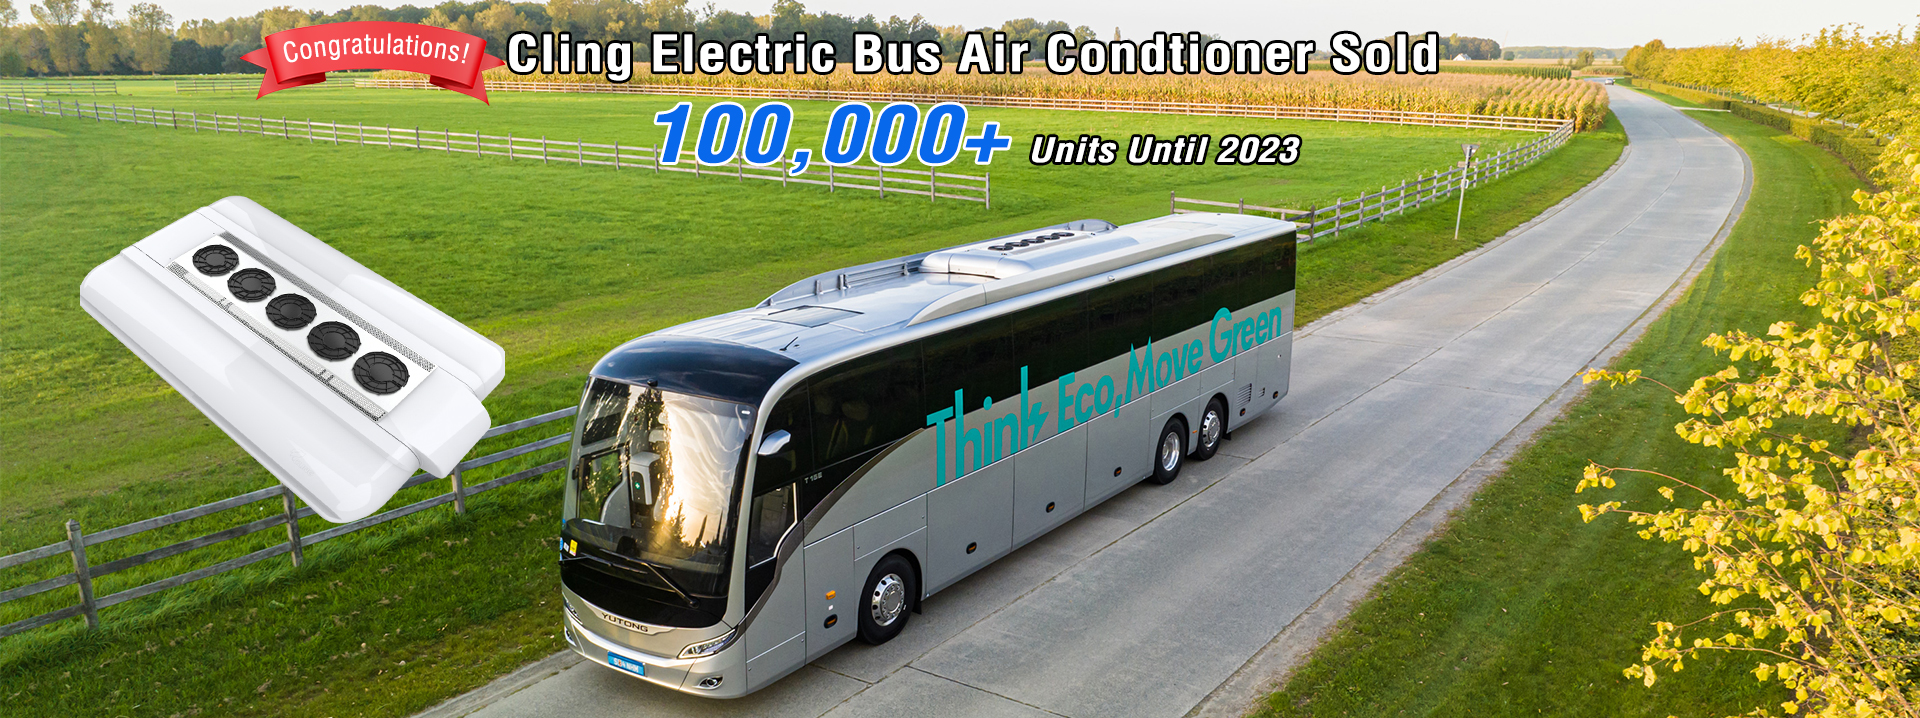 Cling Electric Bus Air Conditioners sold 100000 units